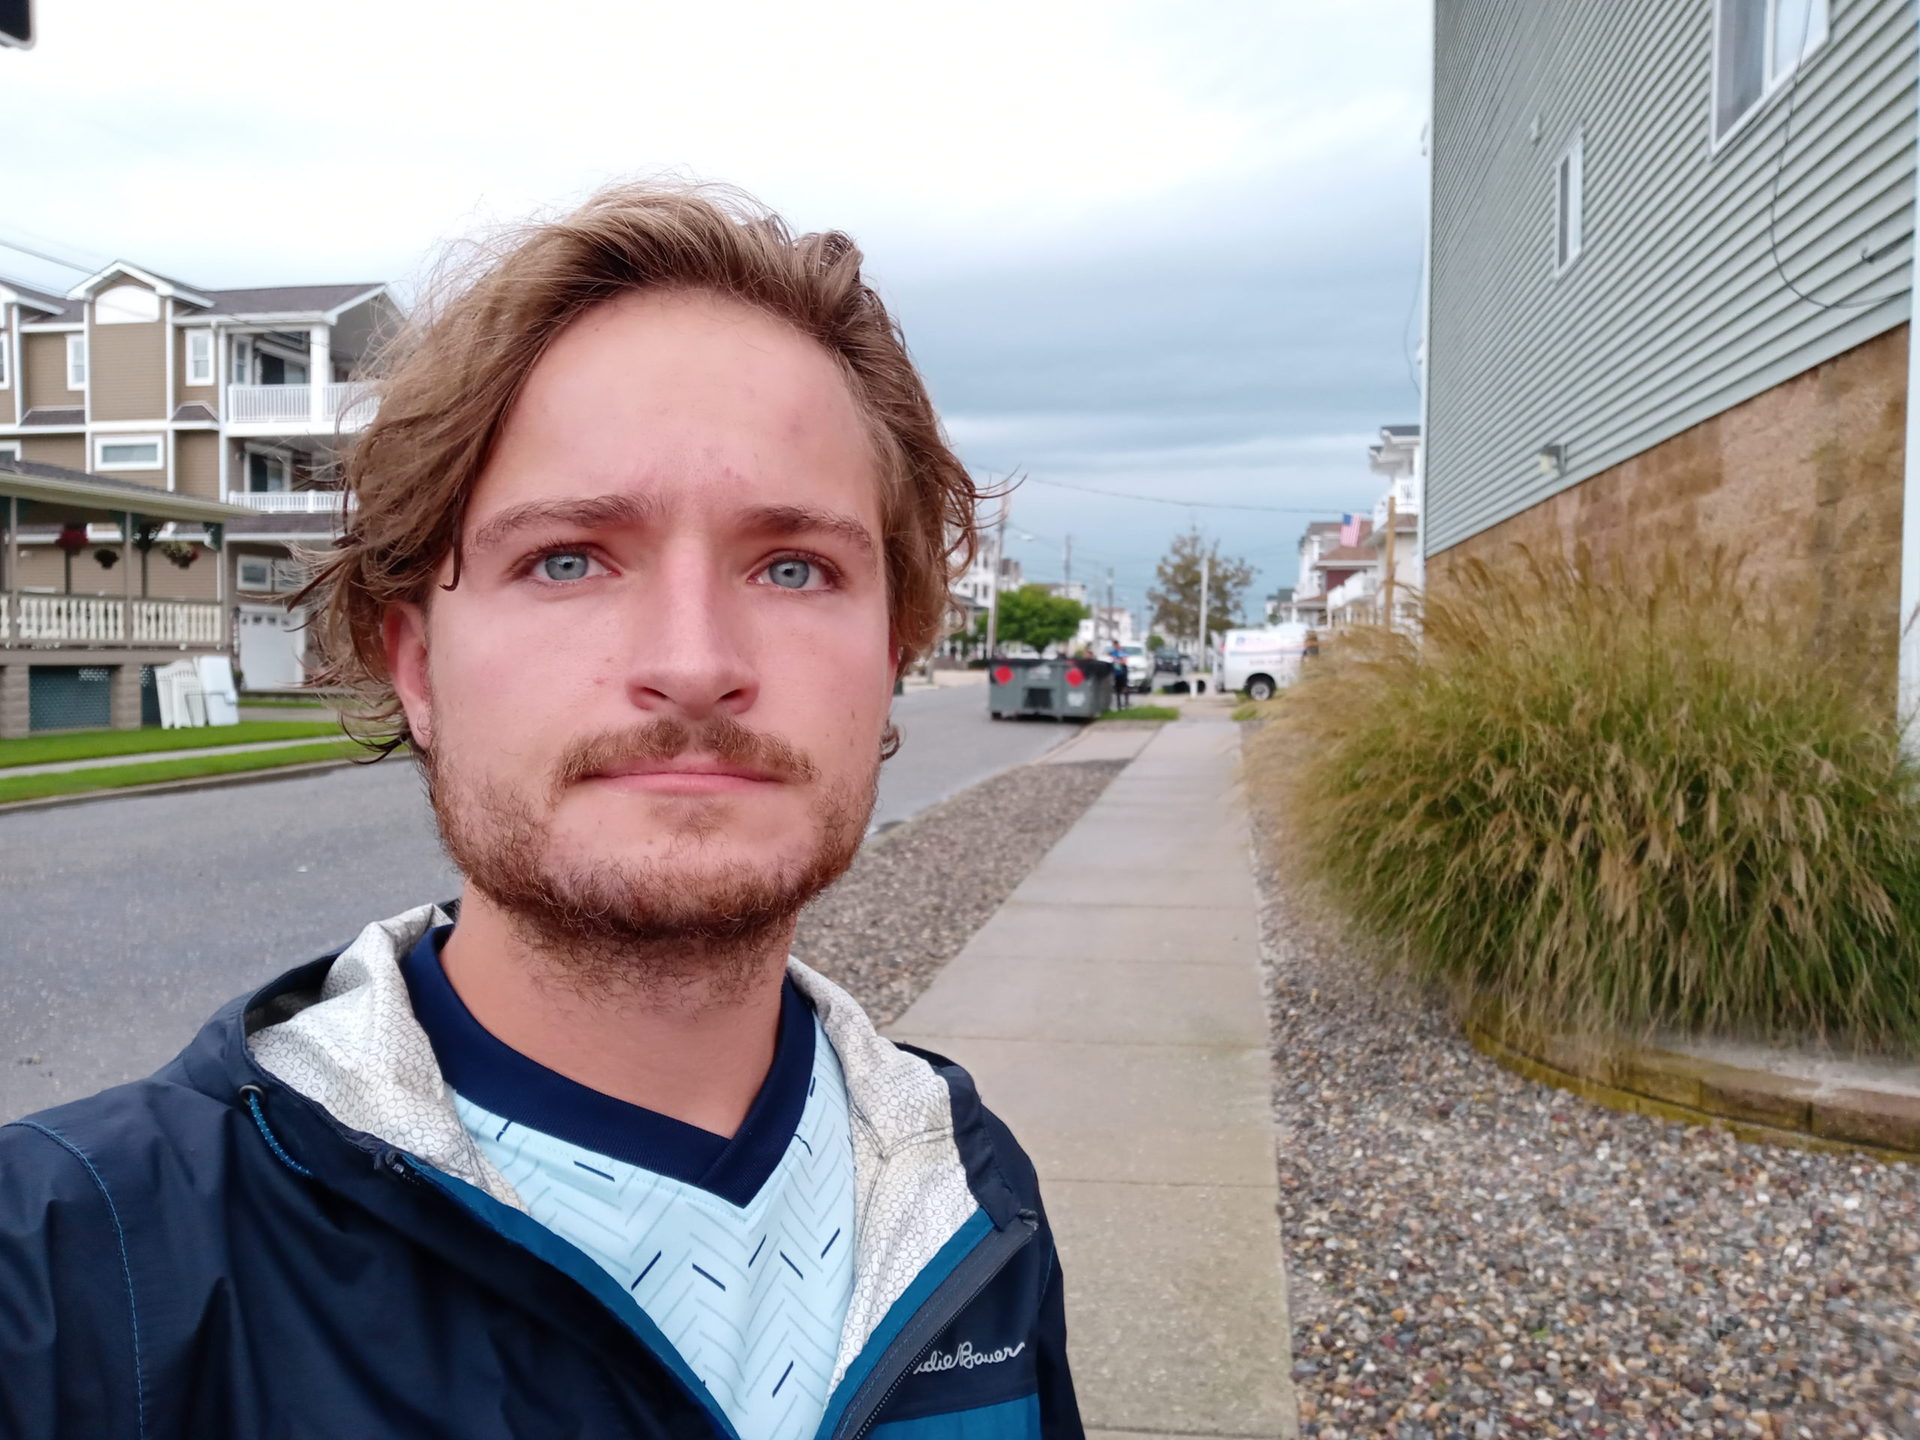 A standard selfie taken with the LG K51 showing a man with light hair and facial hair wearing a white and blue t-shirt with a blue jacket over the top.